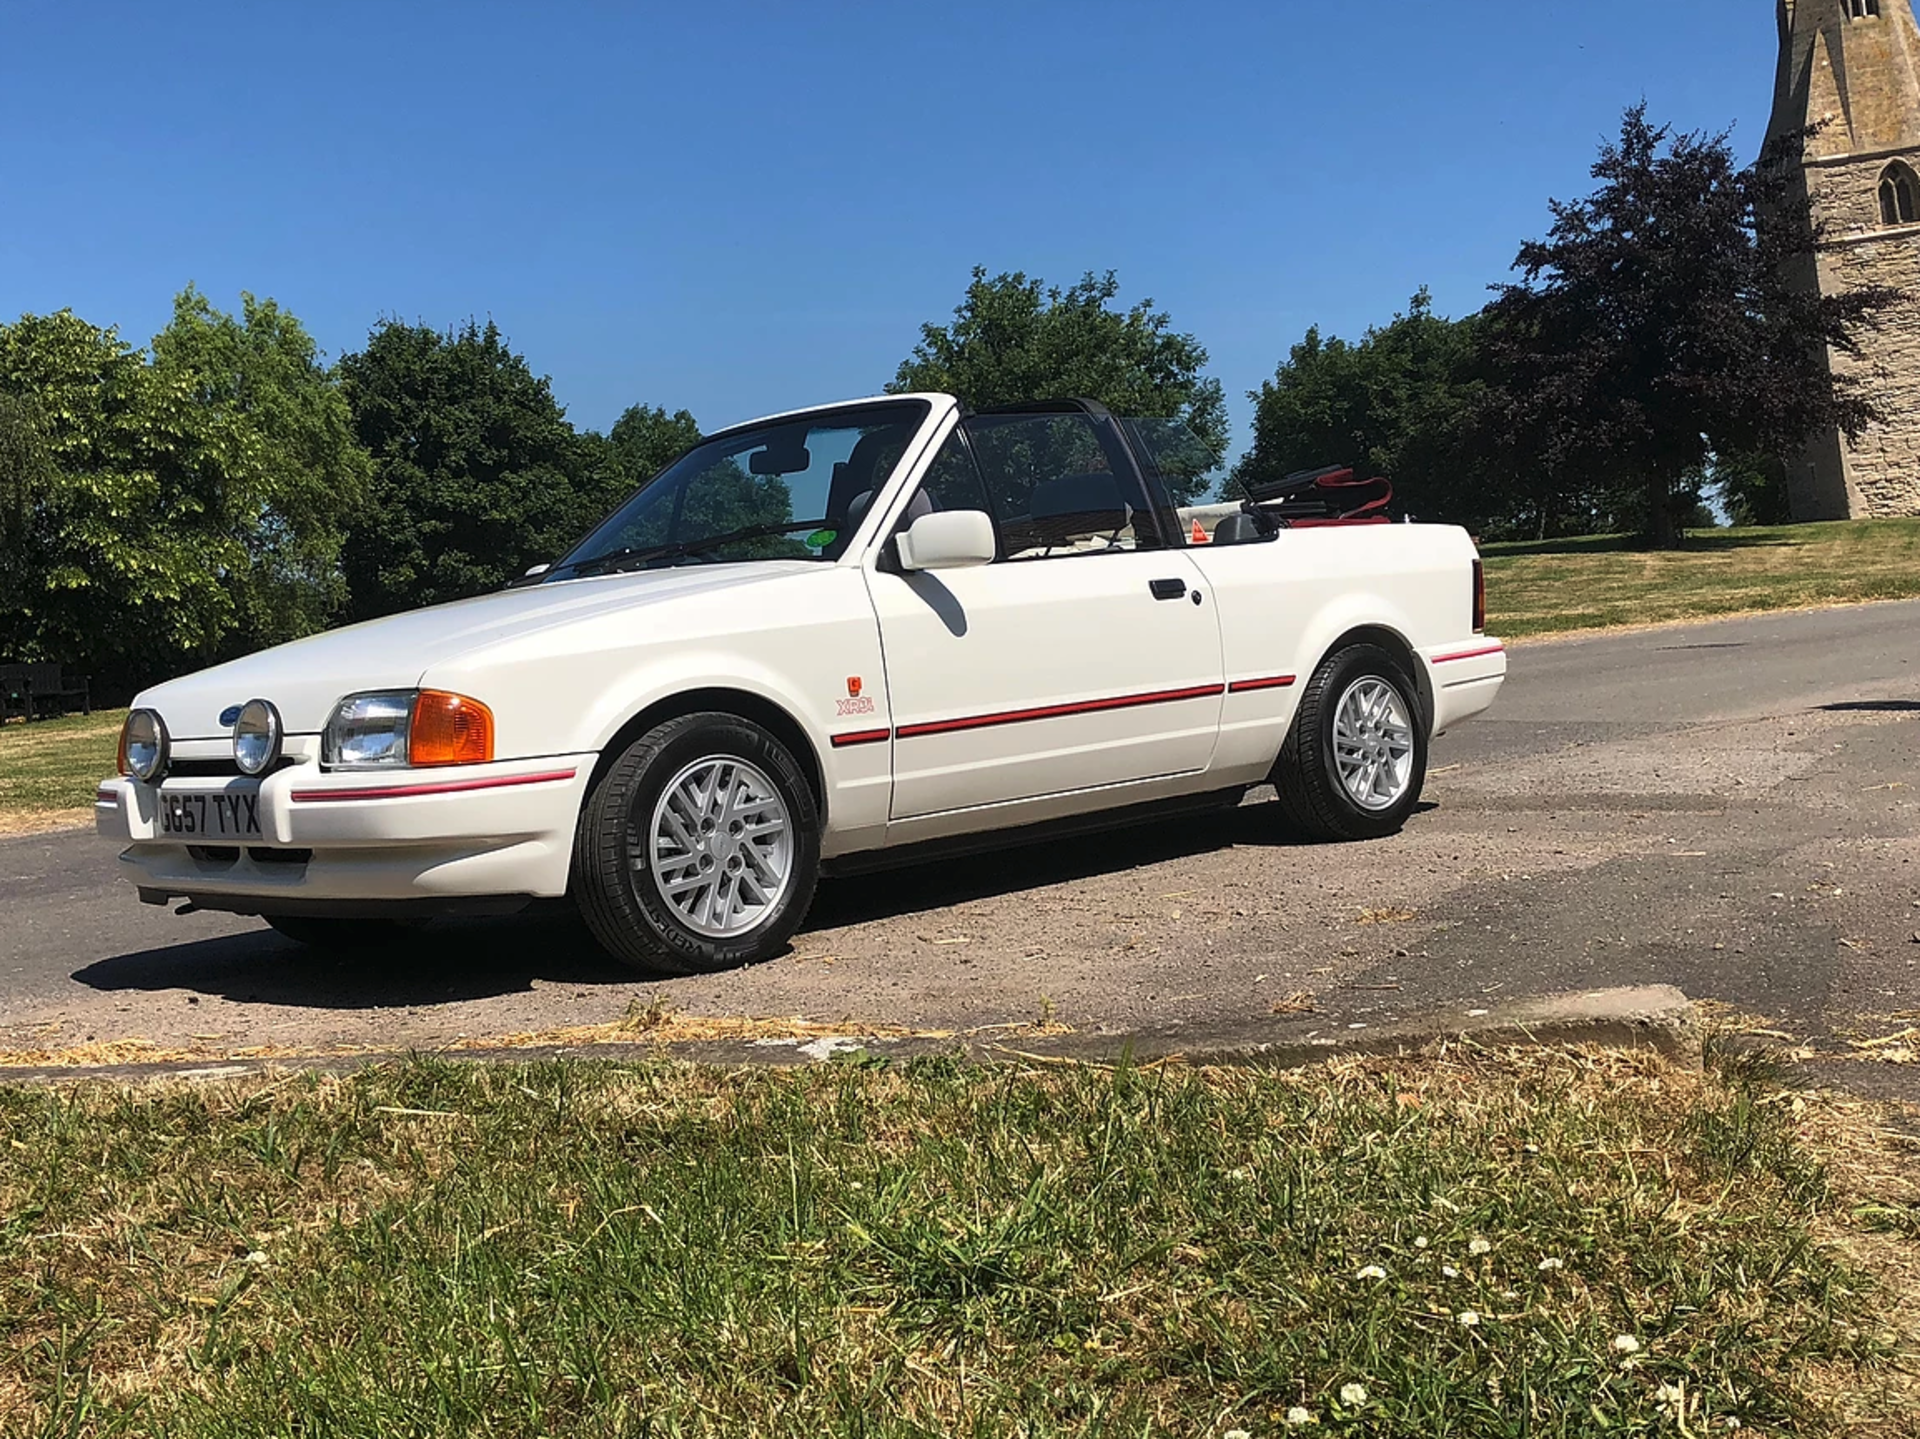 1989 Ford Escort XR3i Convertible - Image 2 of 13